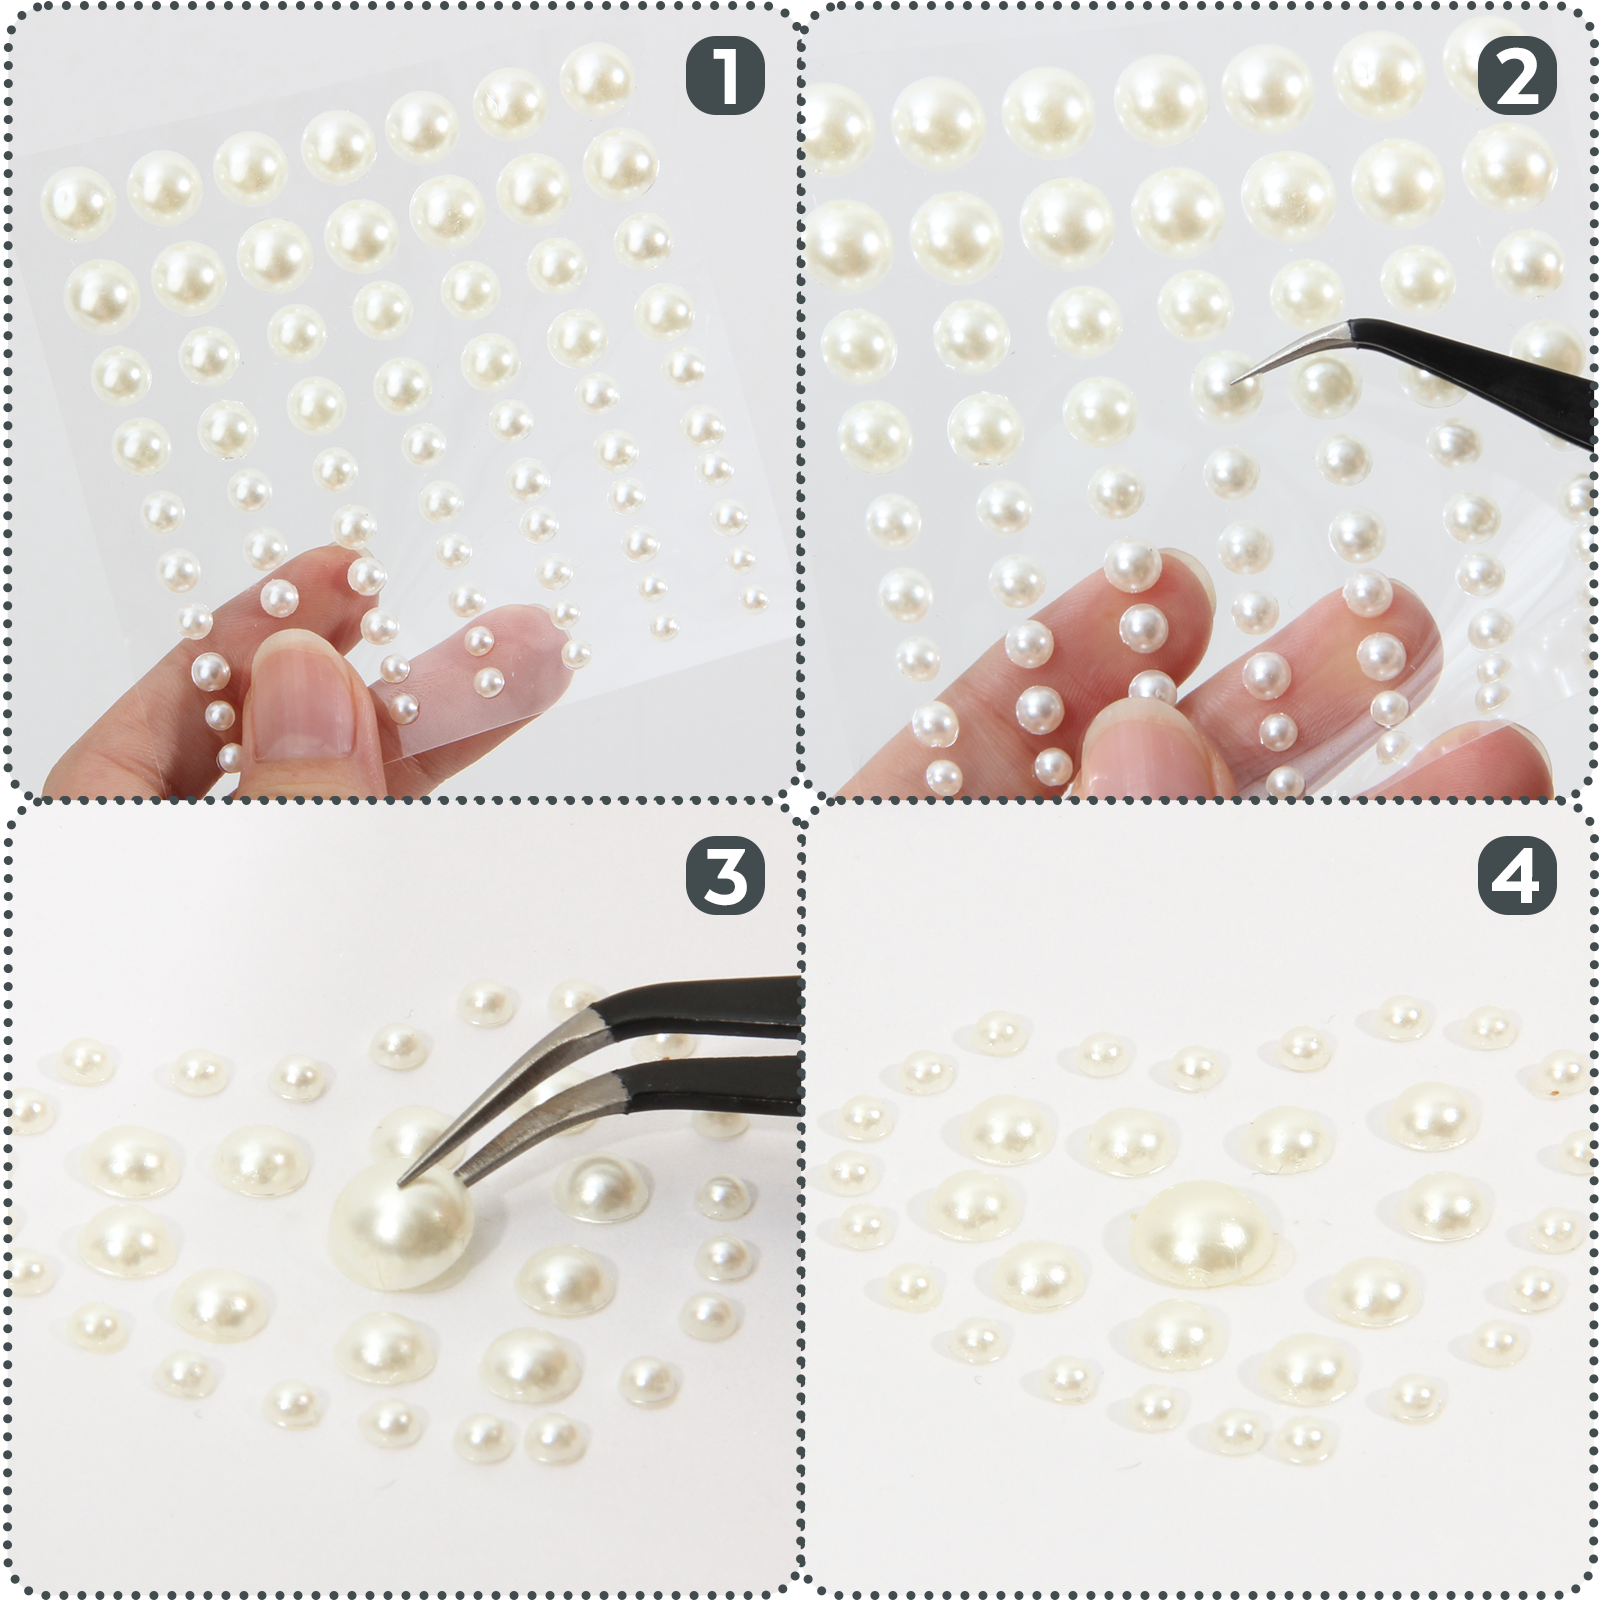  2290Pcs Hair Pearls Stick On, Self Adhesive Pearl Hair  Stickers, Stick On Pearls for Hair Face Makeup Nail DIY Crafts, Assorted  Sizes